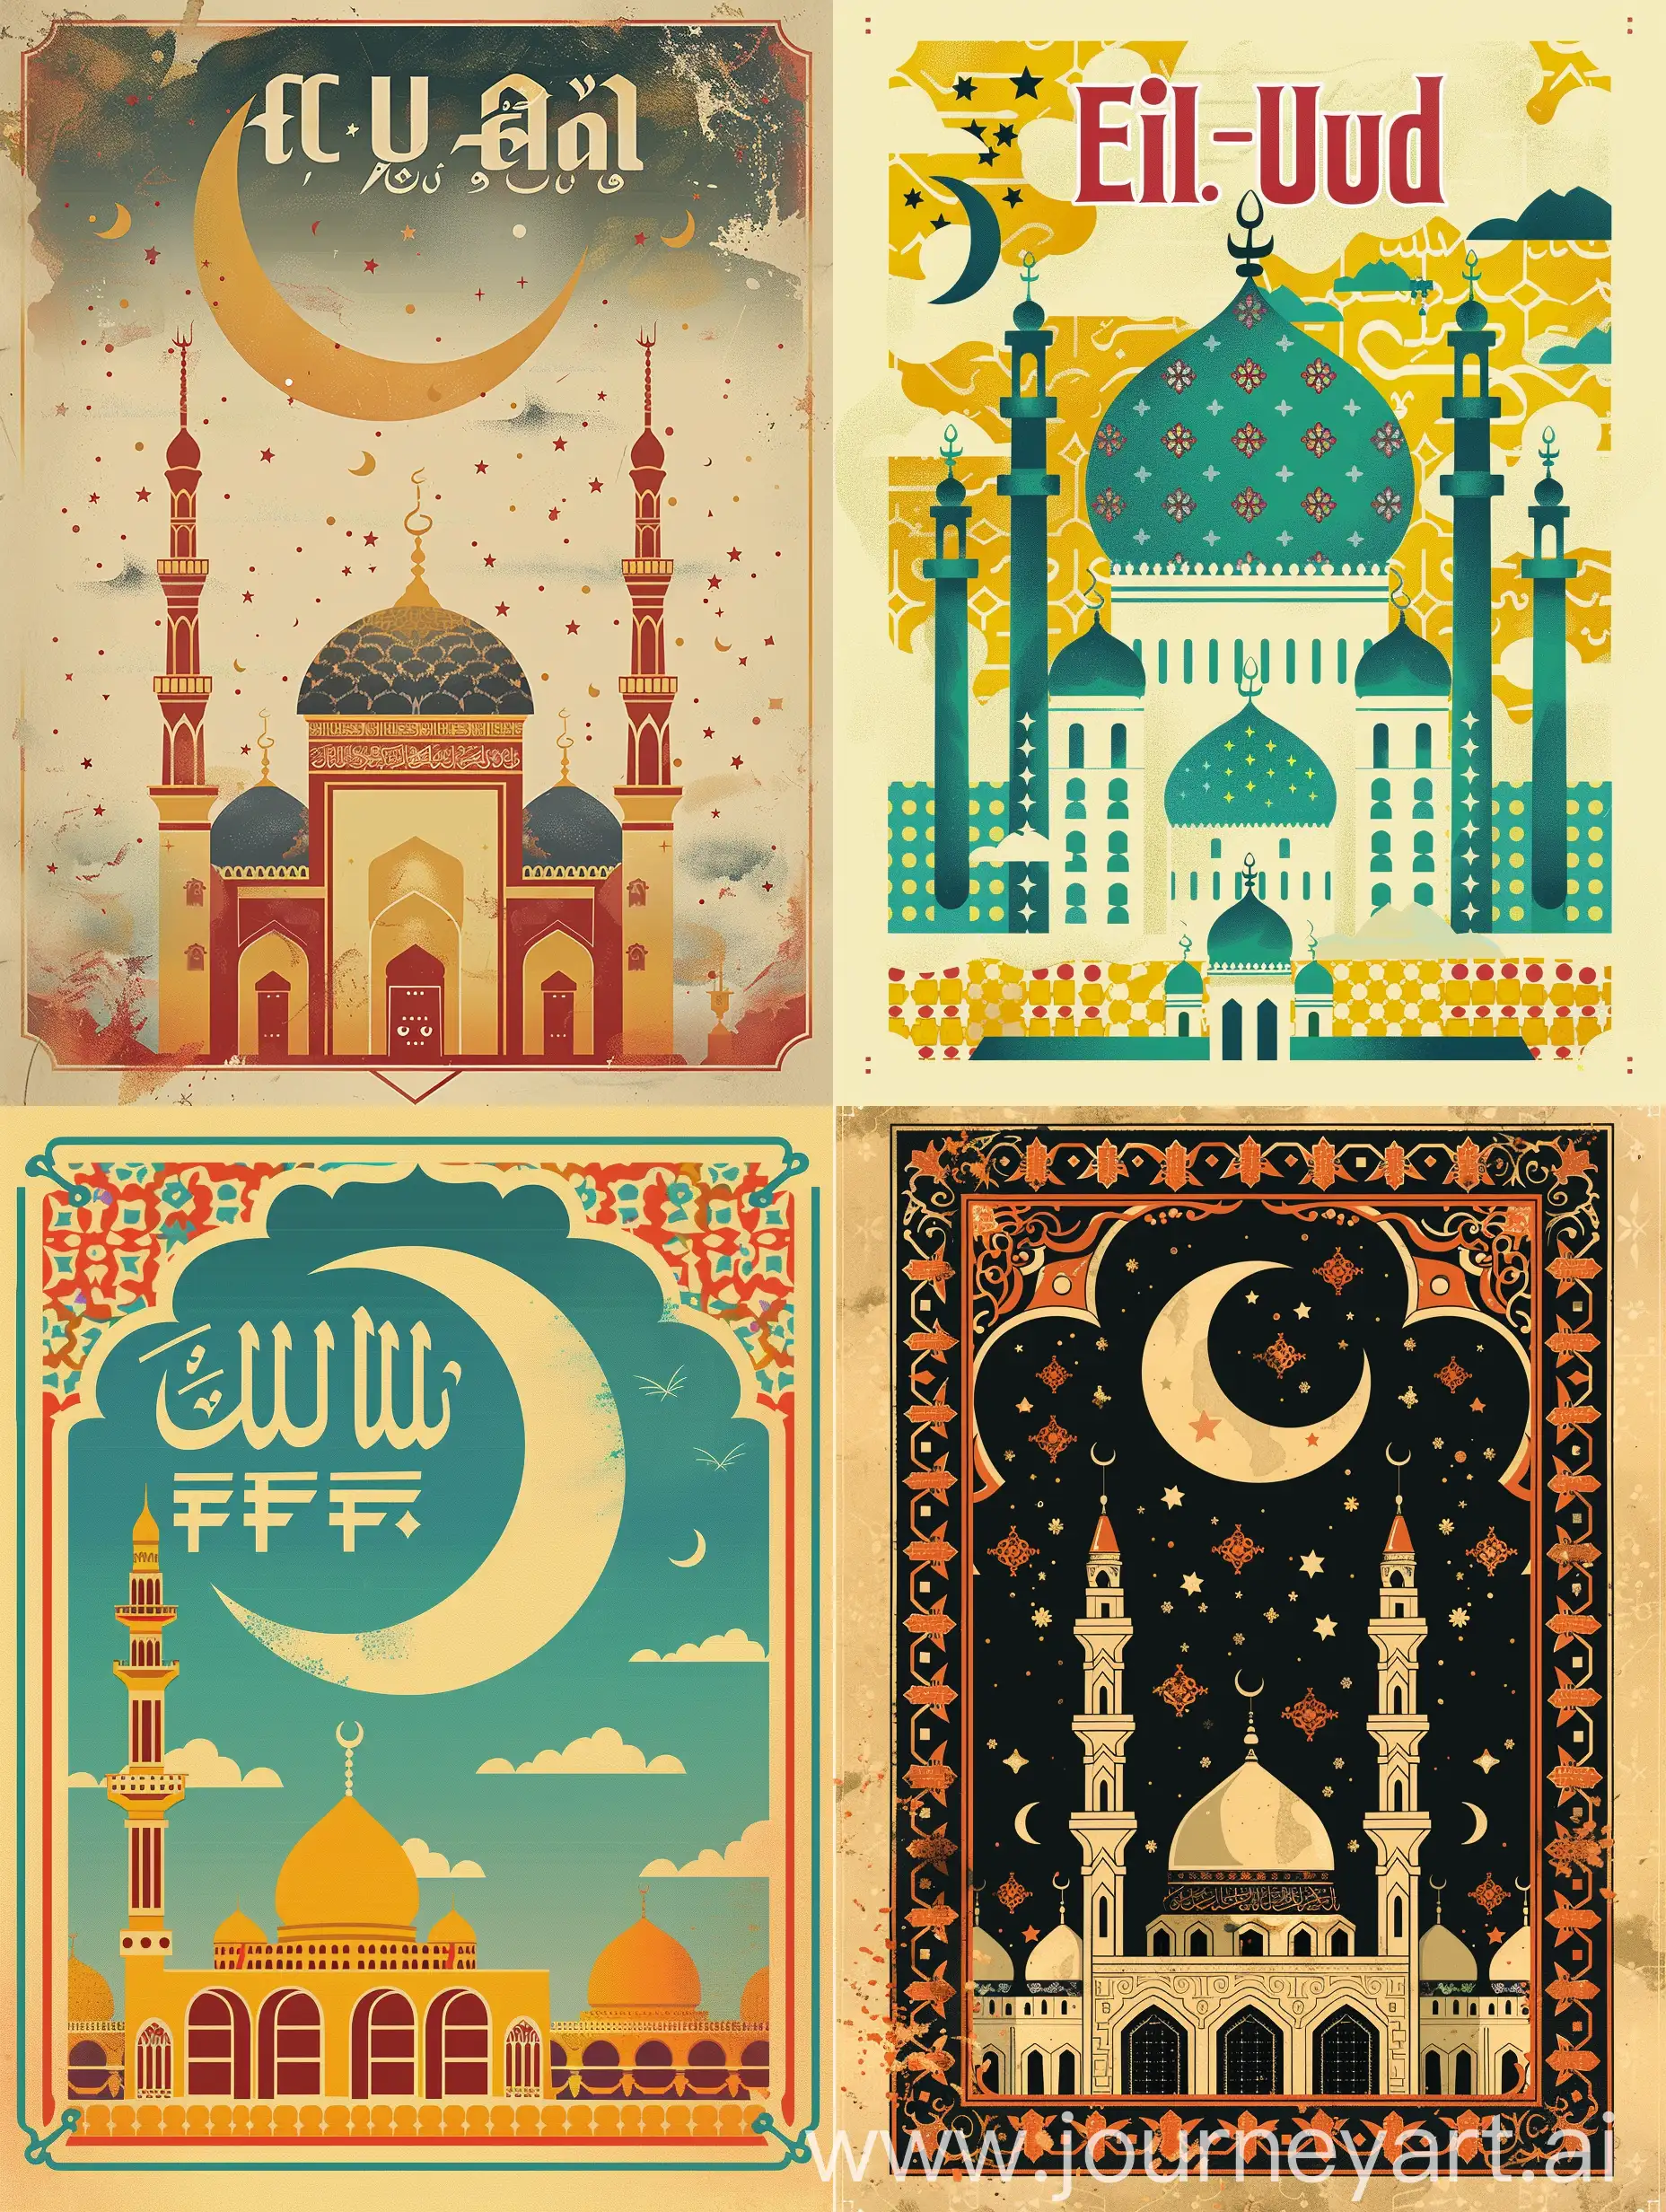 a poster for Eid-Ul-Fitr(fitr holiday), use islamic patterns, also use a mosque and moon cresent